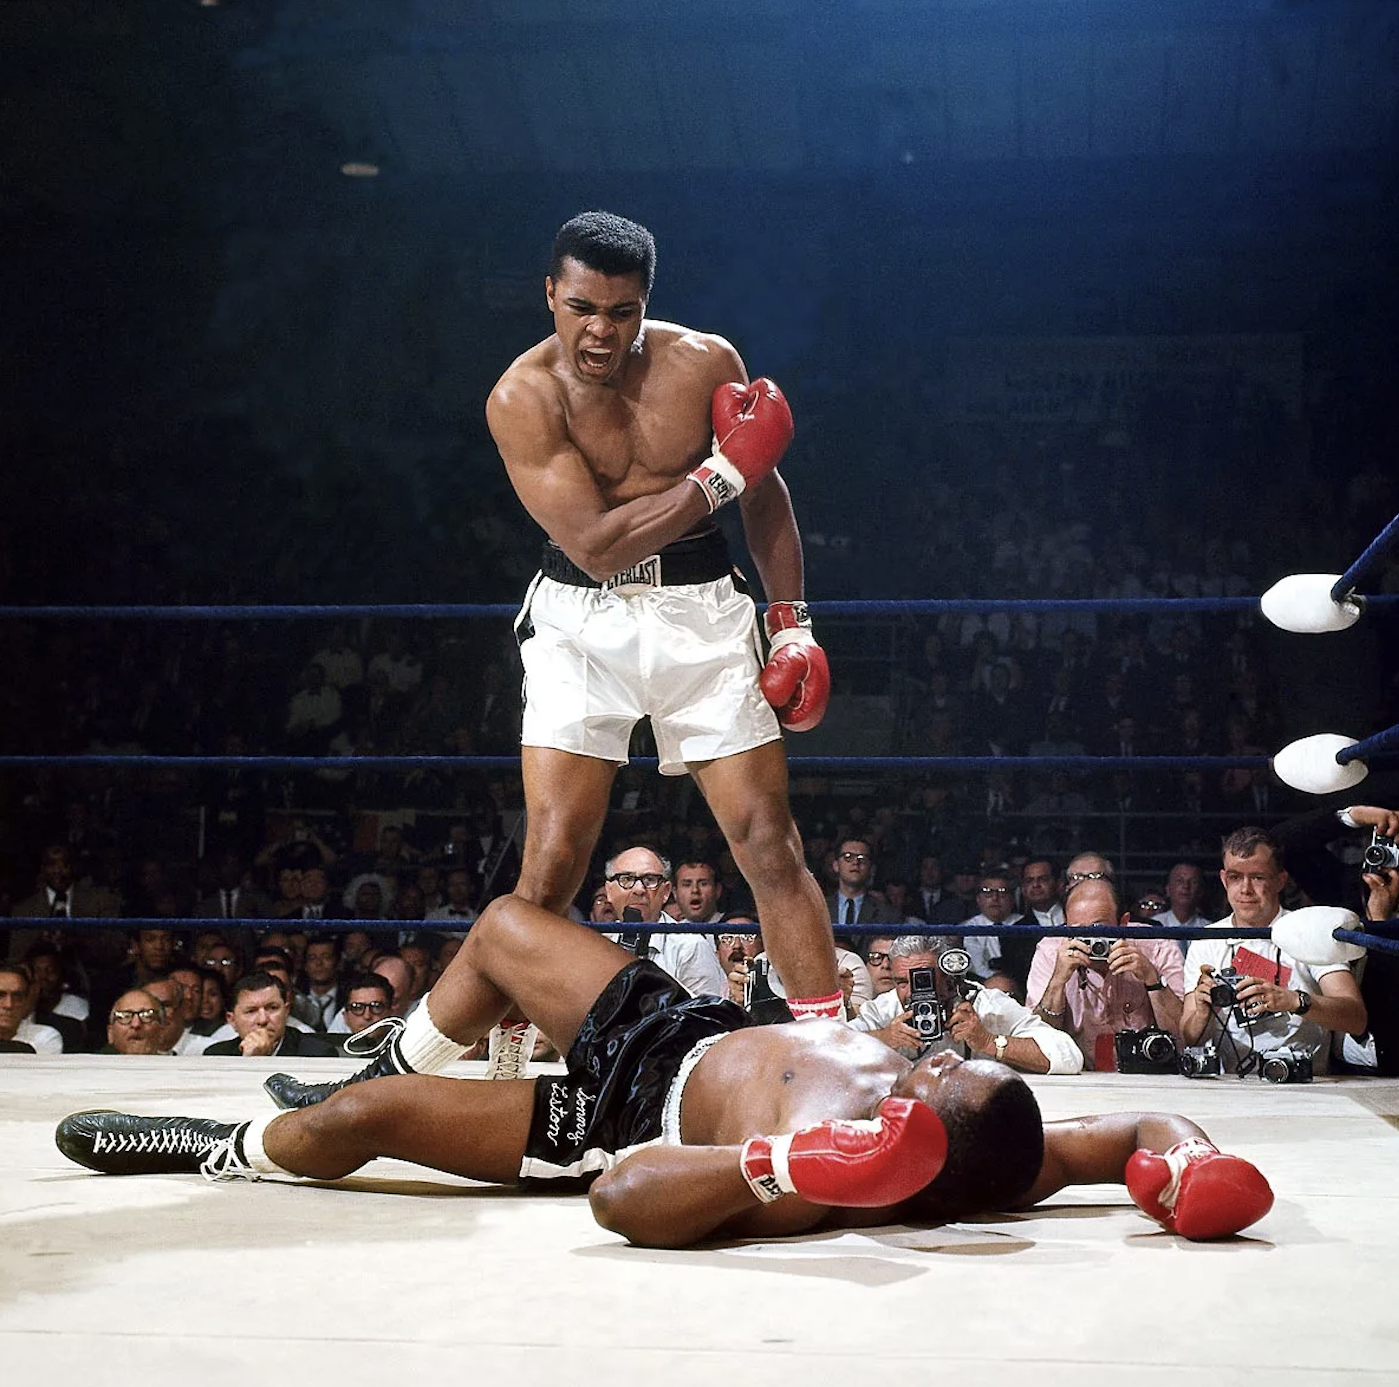 Muhammad Ali and Sonny Liston, May 25, 1965. Another K.O. for Ali. Photo by: Neil Leifer.